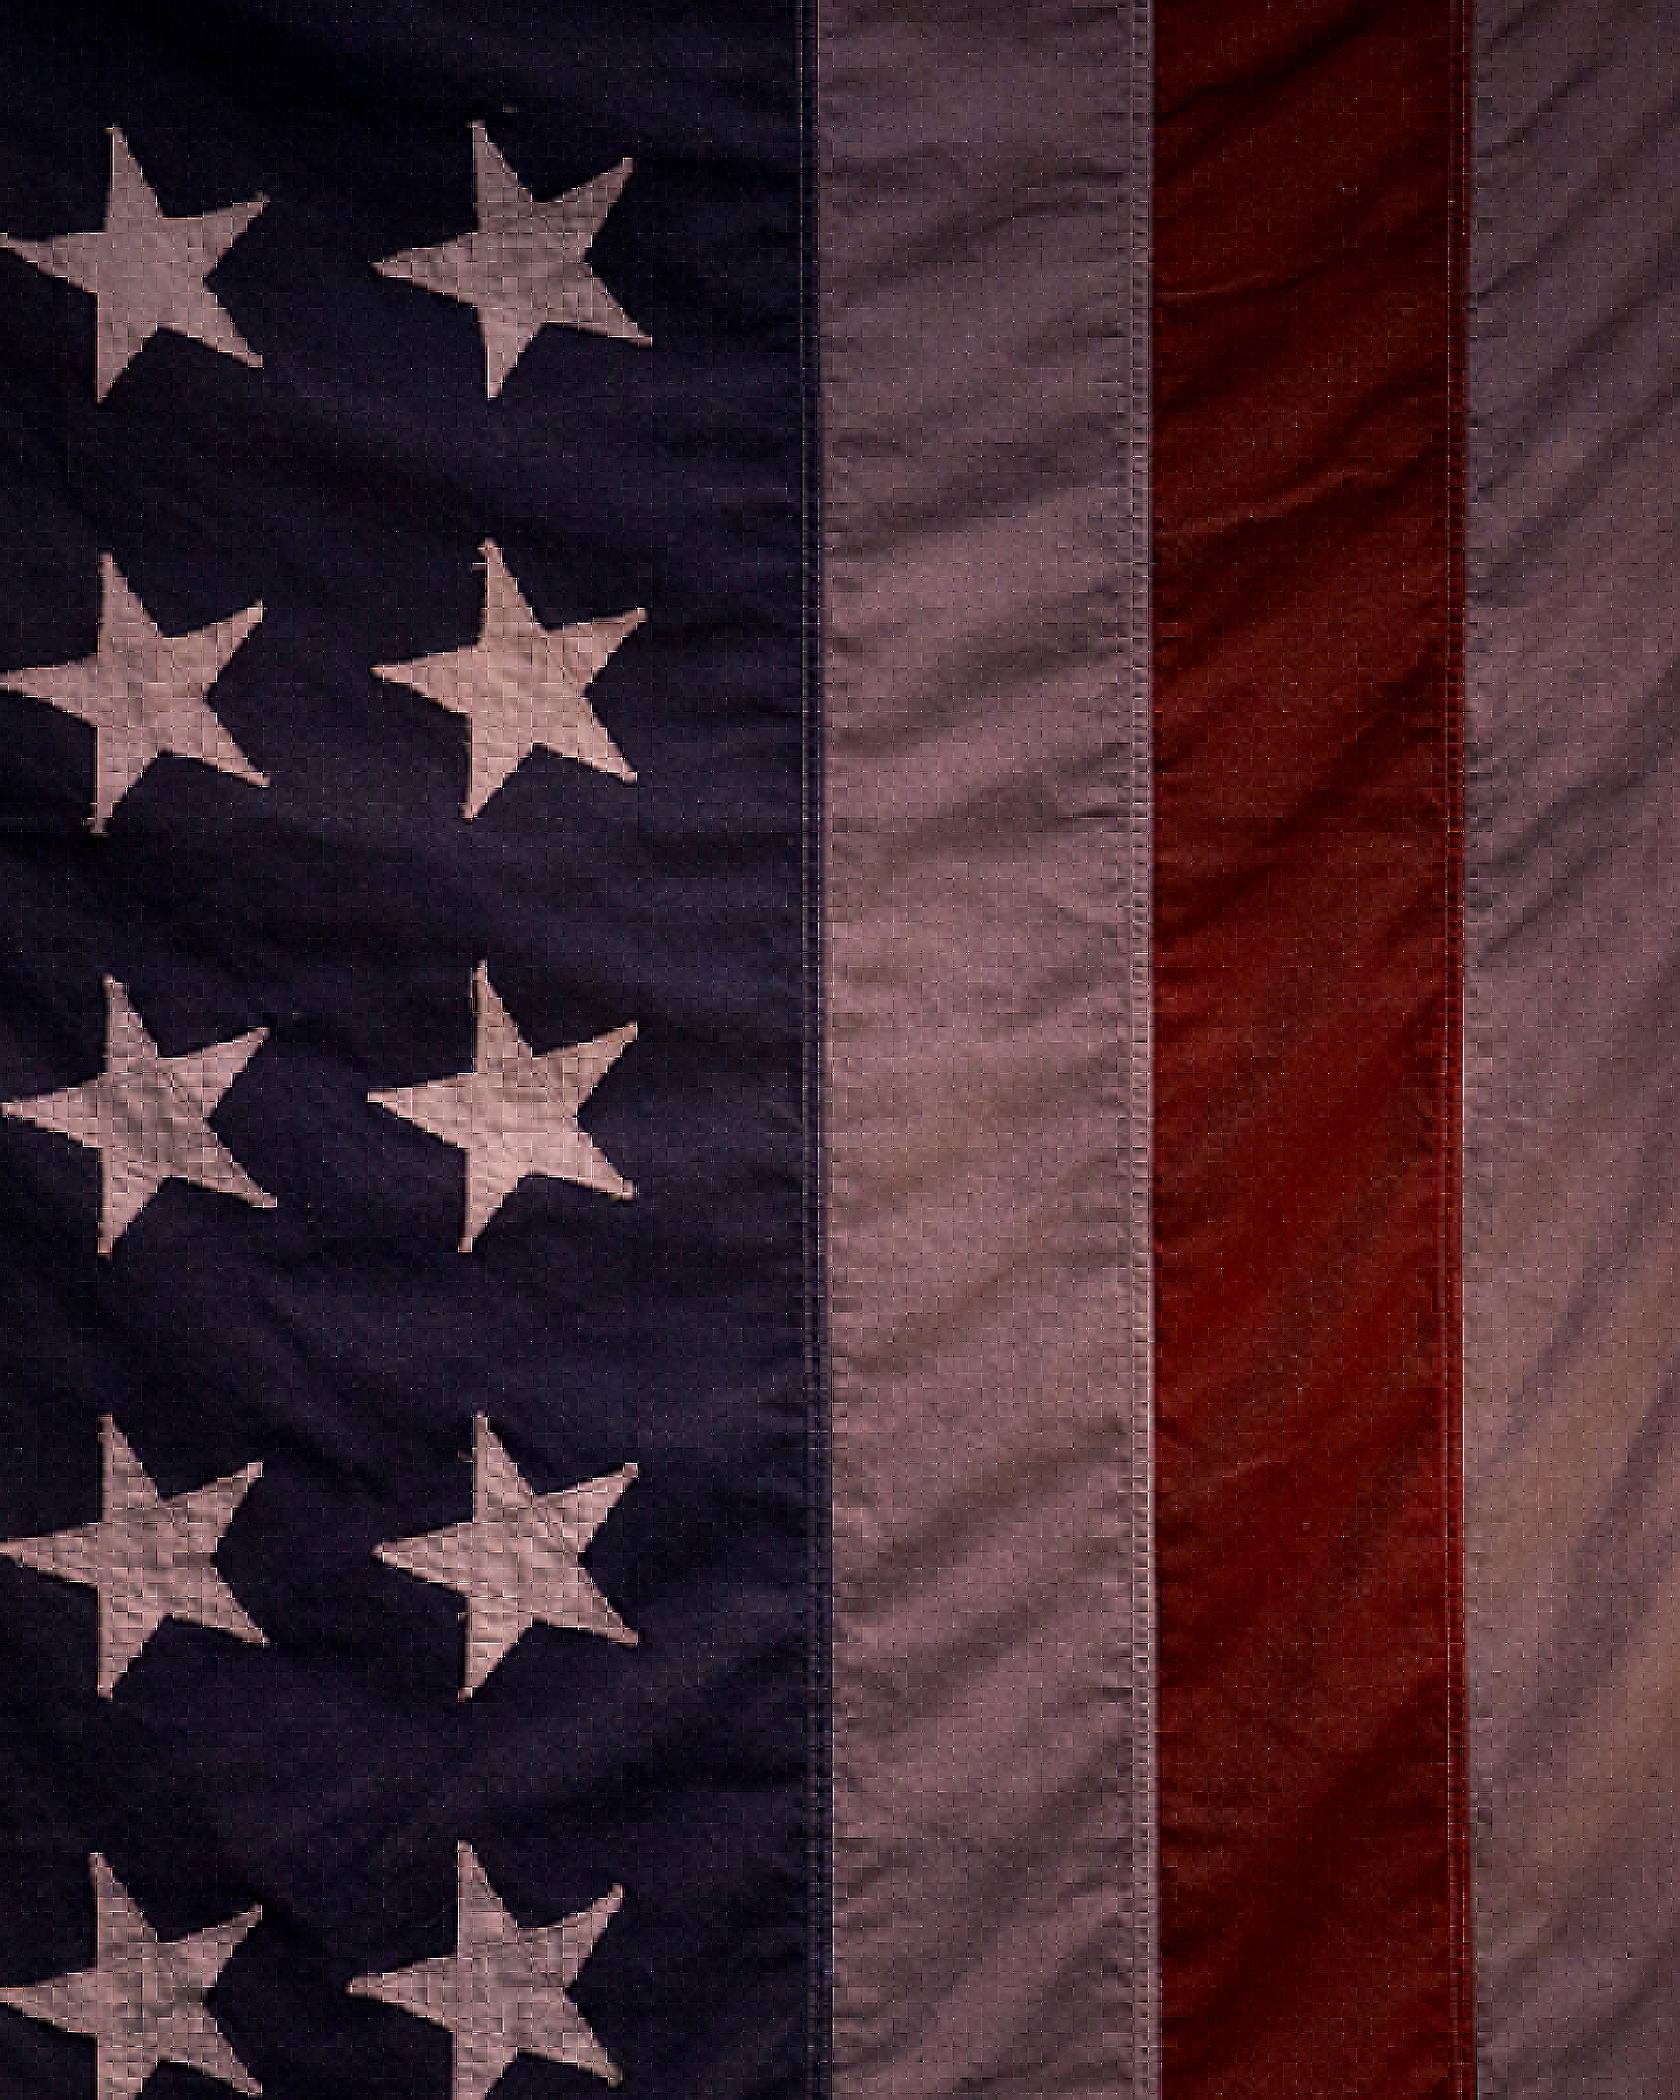 Image of the US flag.